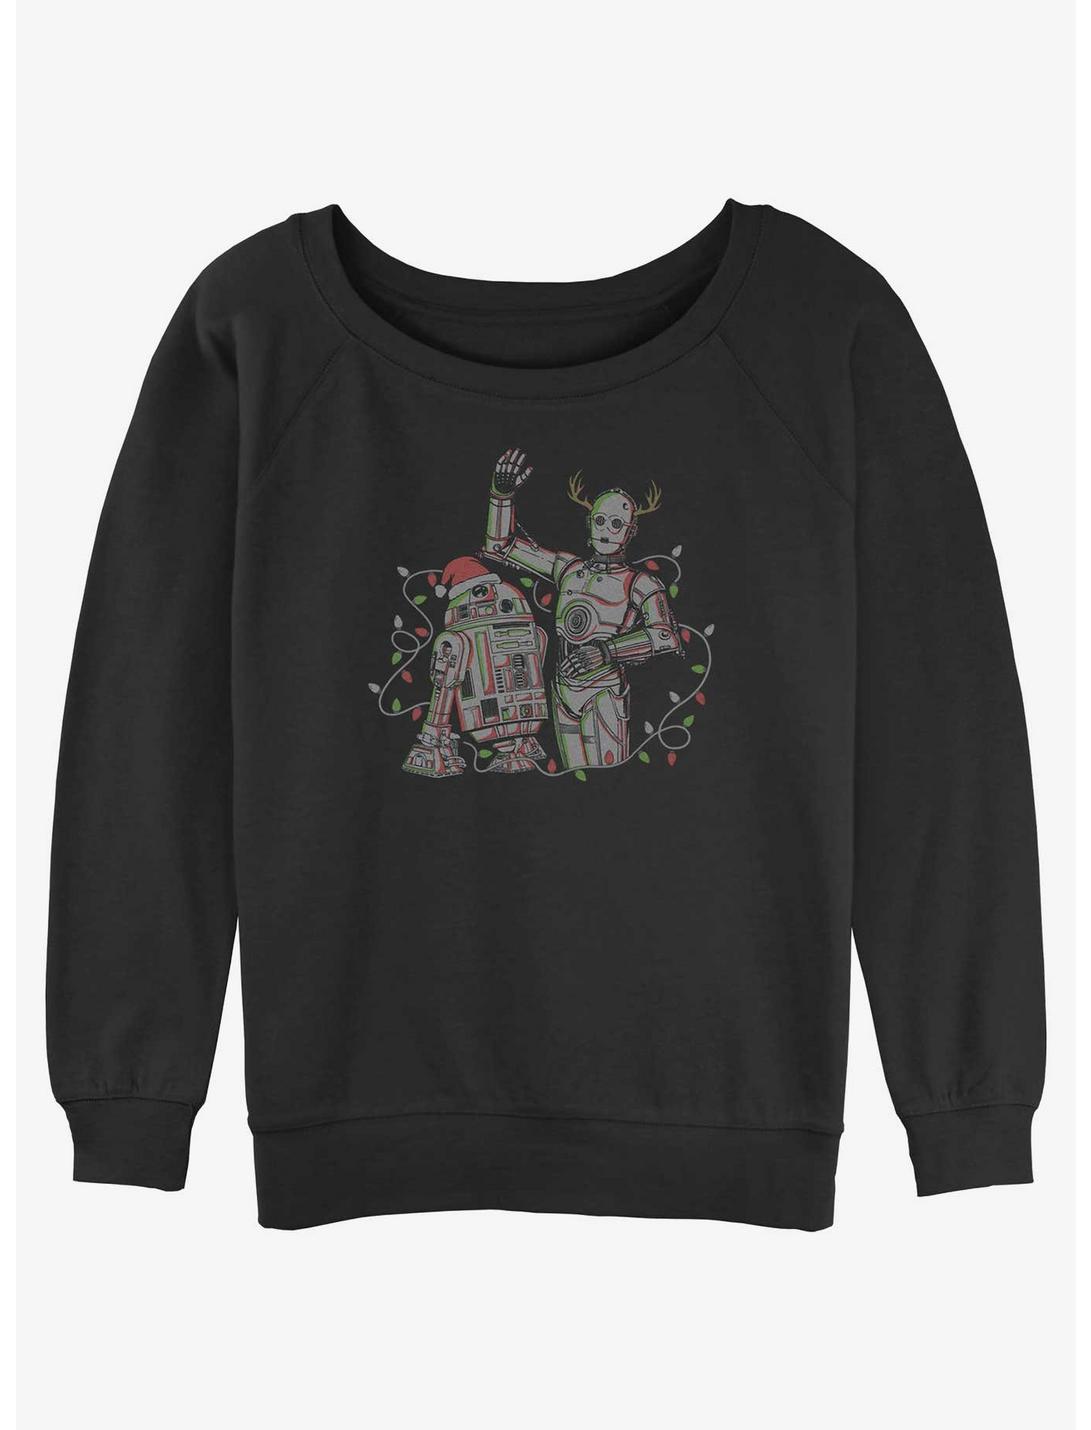 Star Wars Holiday Droids R2-D2 and C-3PO Womens Slouchy Sweatshirt, BLACK, hi-res